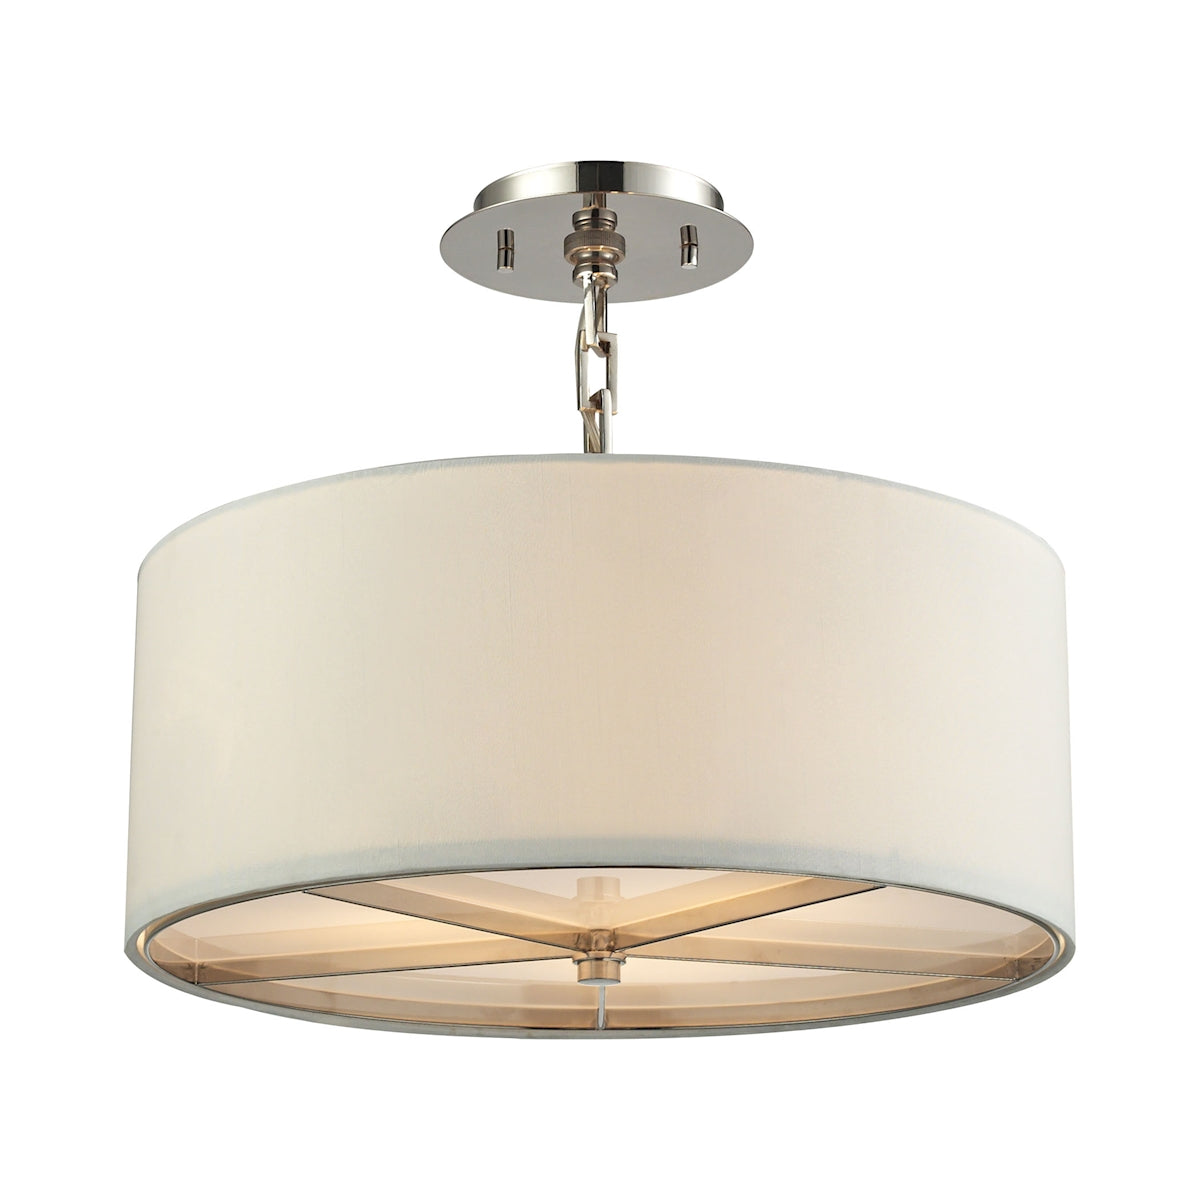 ELK Lighting 31650/3 Selma 3-Light Pendant in Polished Nickel with White Fabric Shade